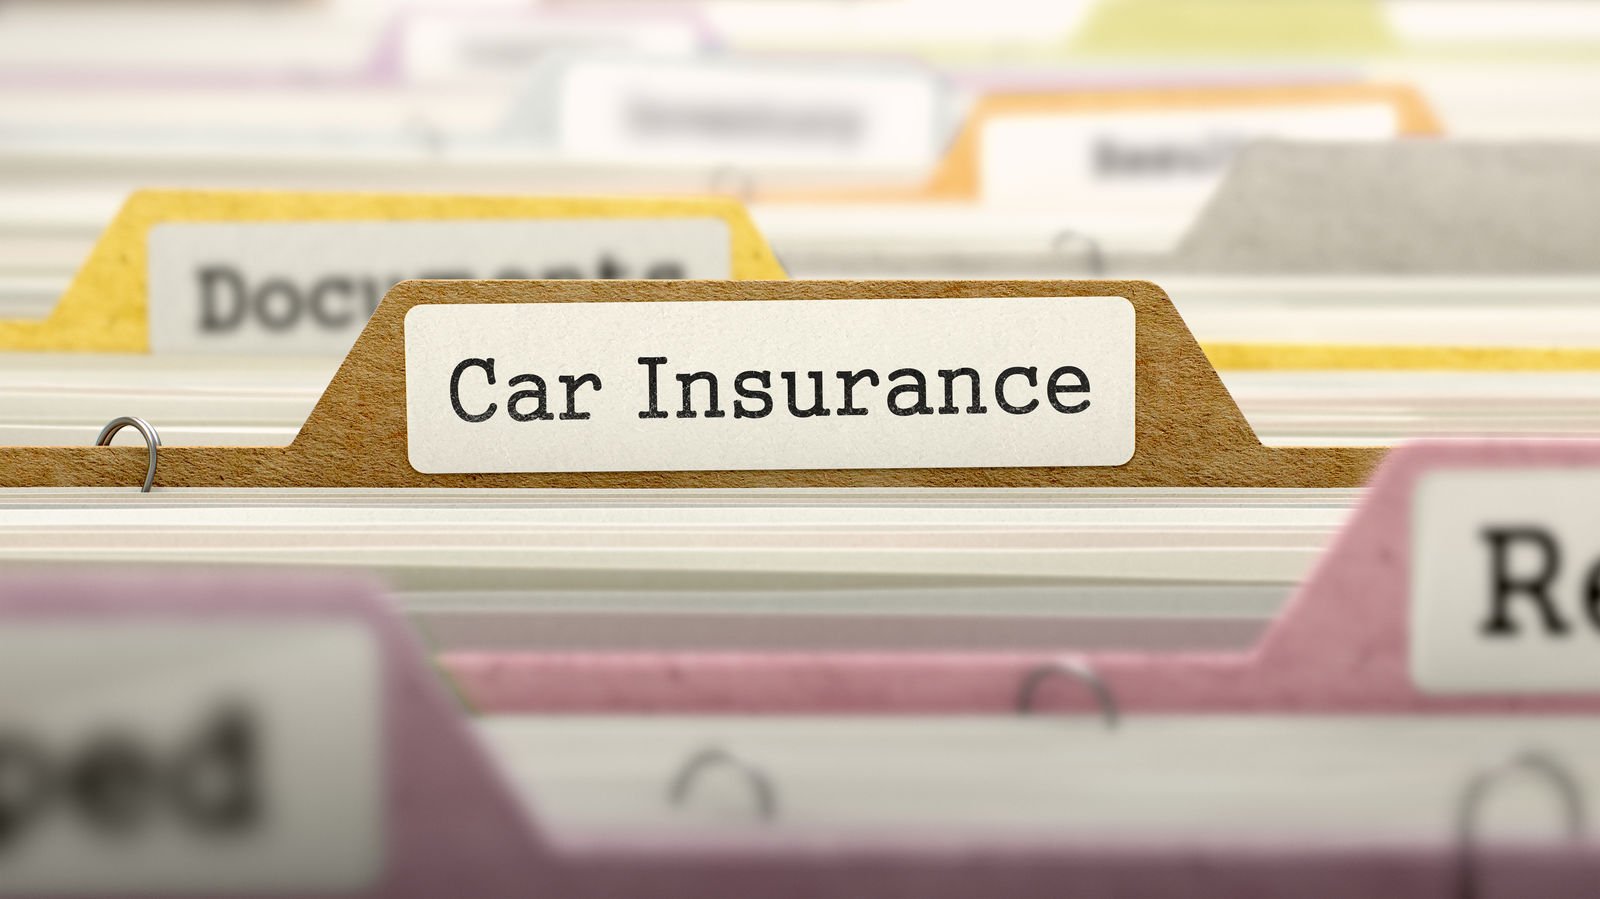 What documents do you need to get car insurance?